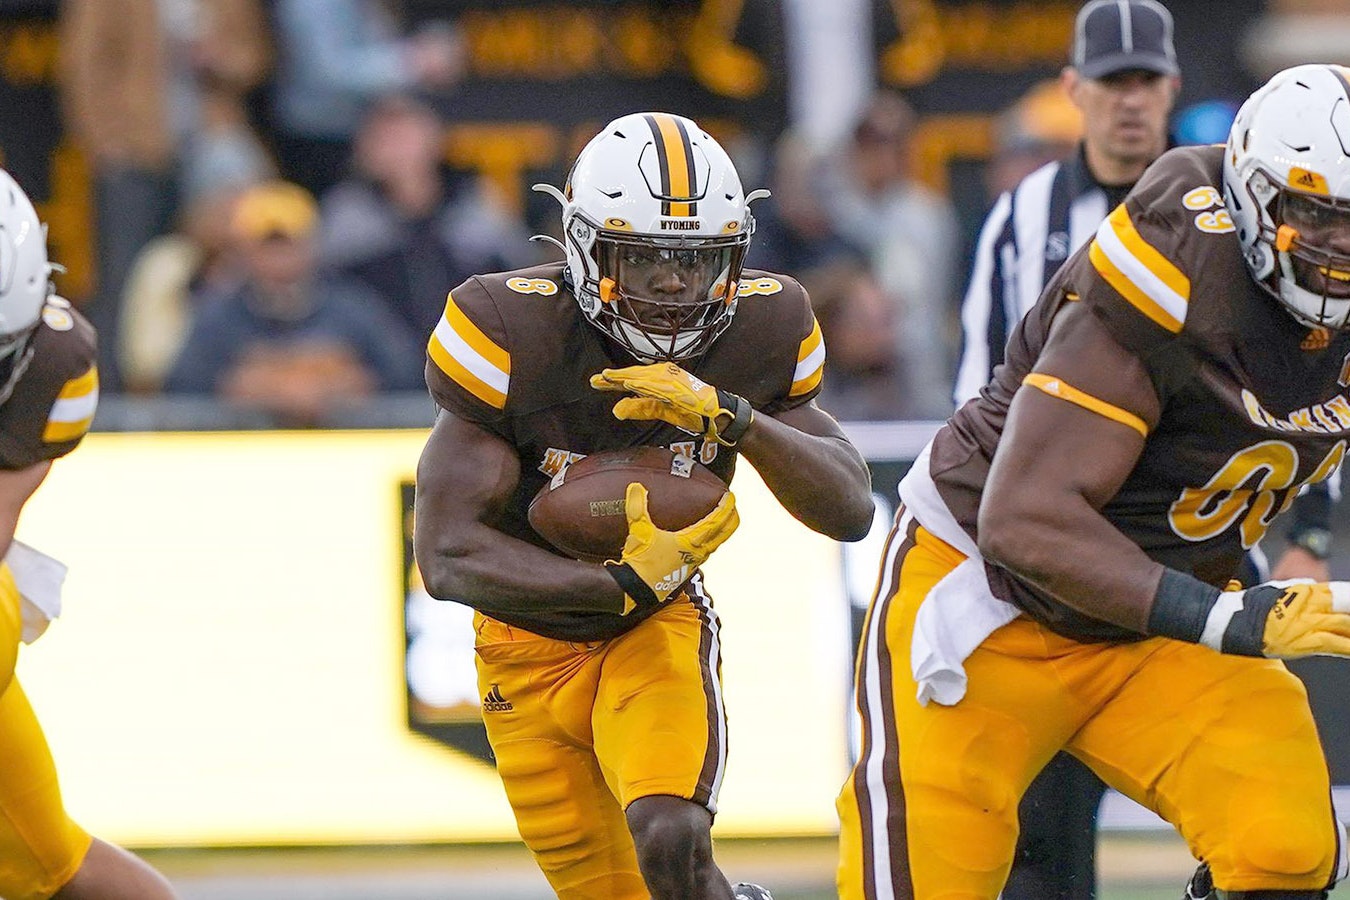 Titus Swen was the University of Wyoming's leading rusher in 2022, topping 1,000 yards. He was dismissed from the team before its bowl game by head coach Craig Bohl, and as been signed by the Indianapolis Colts as an undrafted free agent.